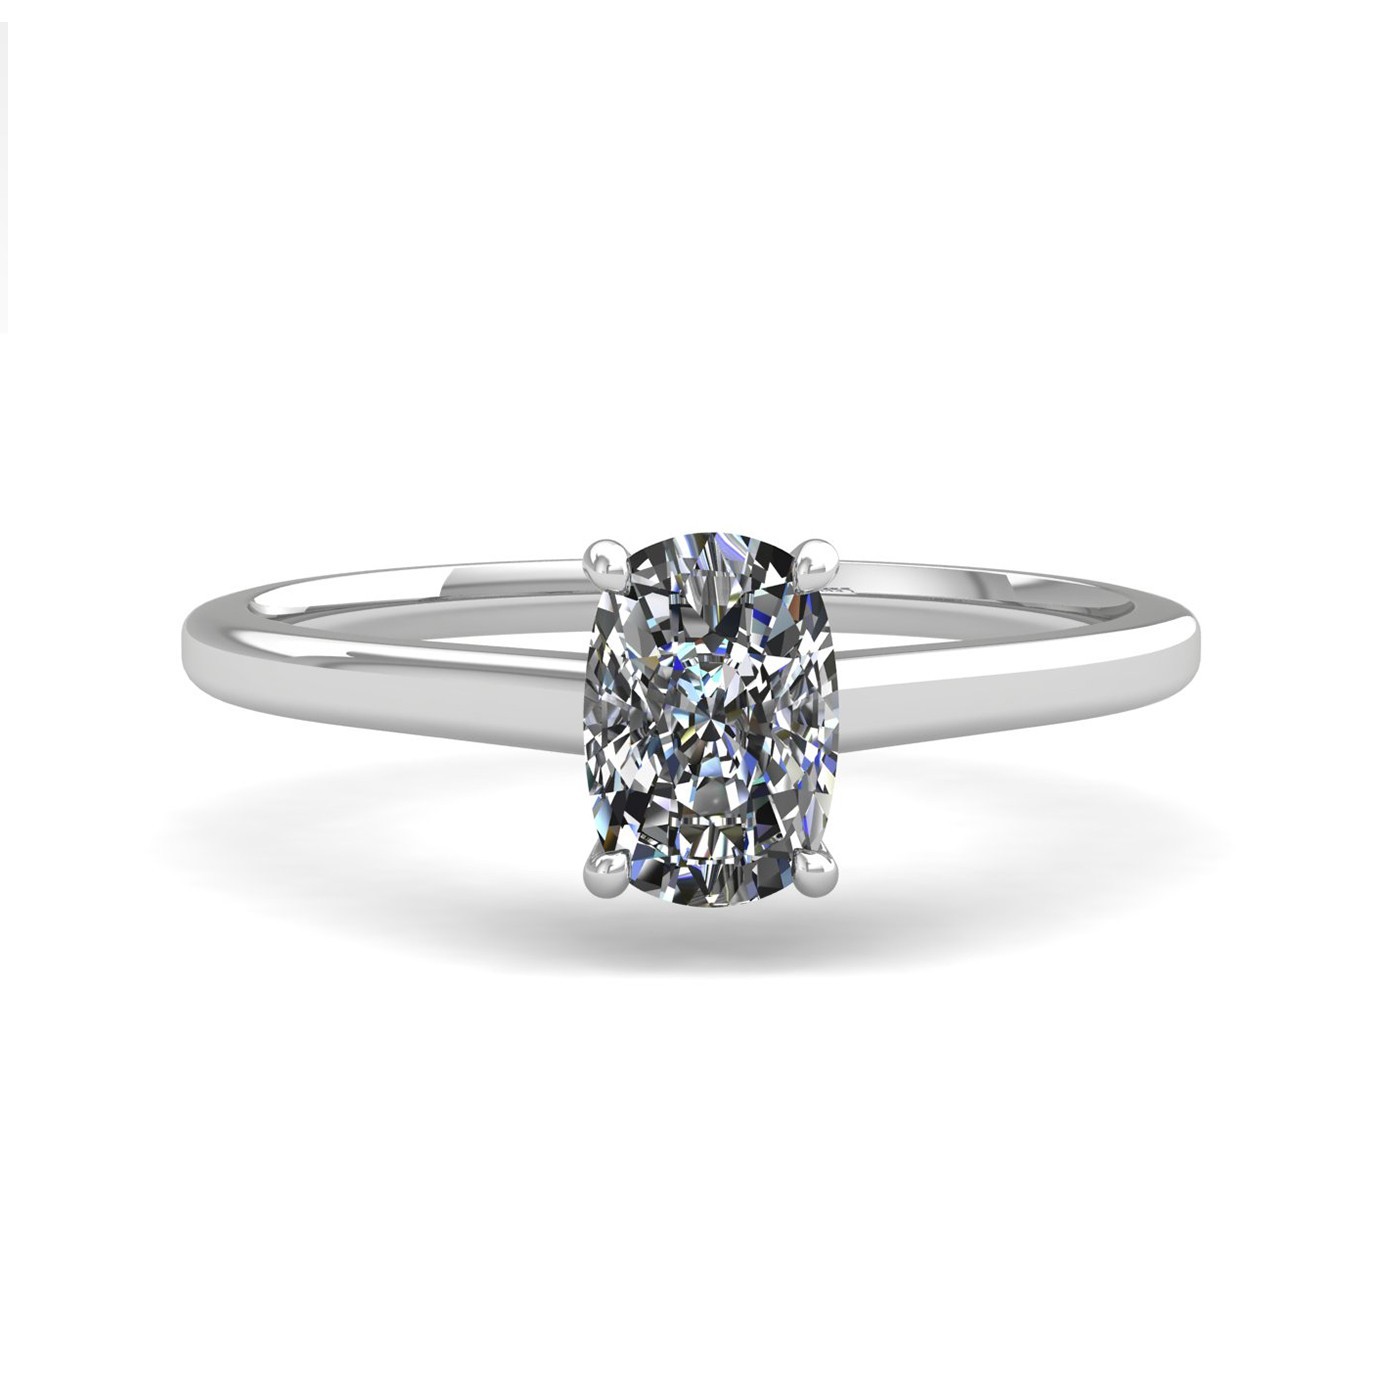 18k white gold  0,80 ct 4 prongs solitaire elongated cushion cut diamond engagement ring with whisper thin band